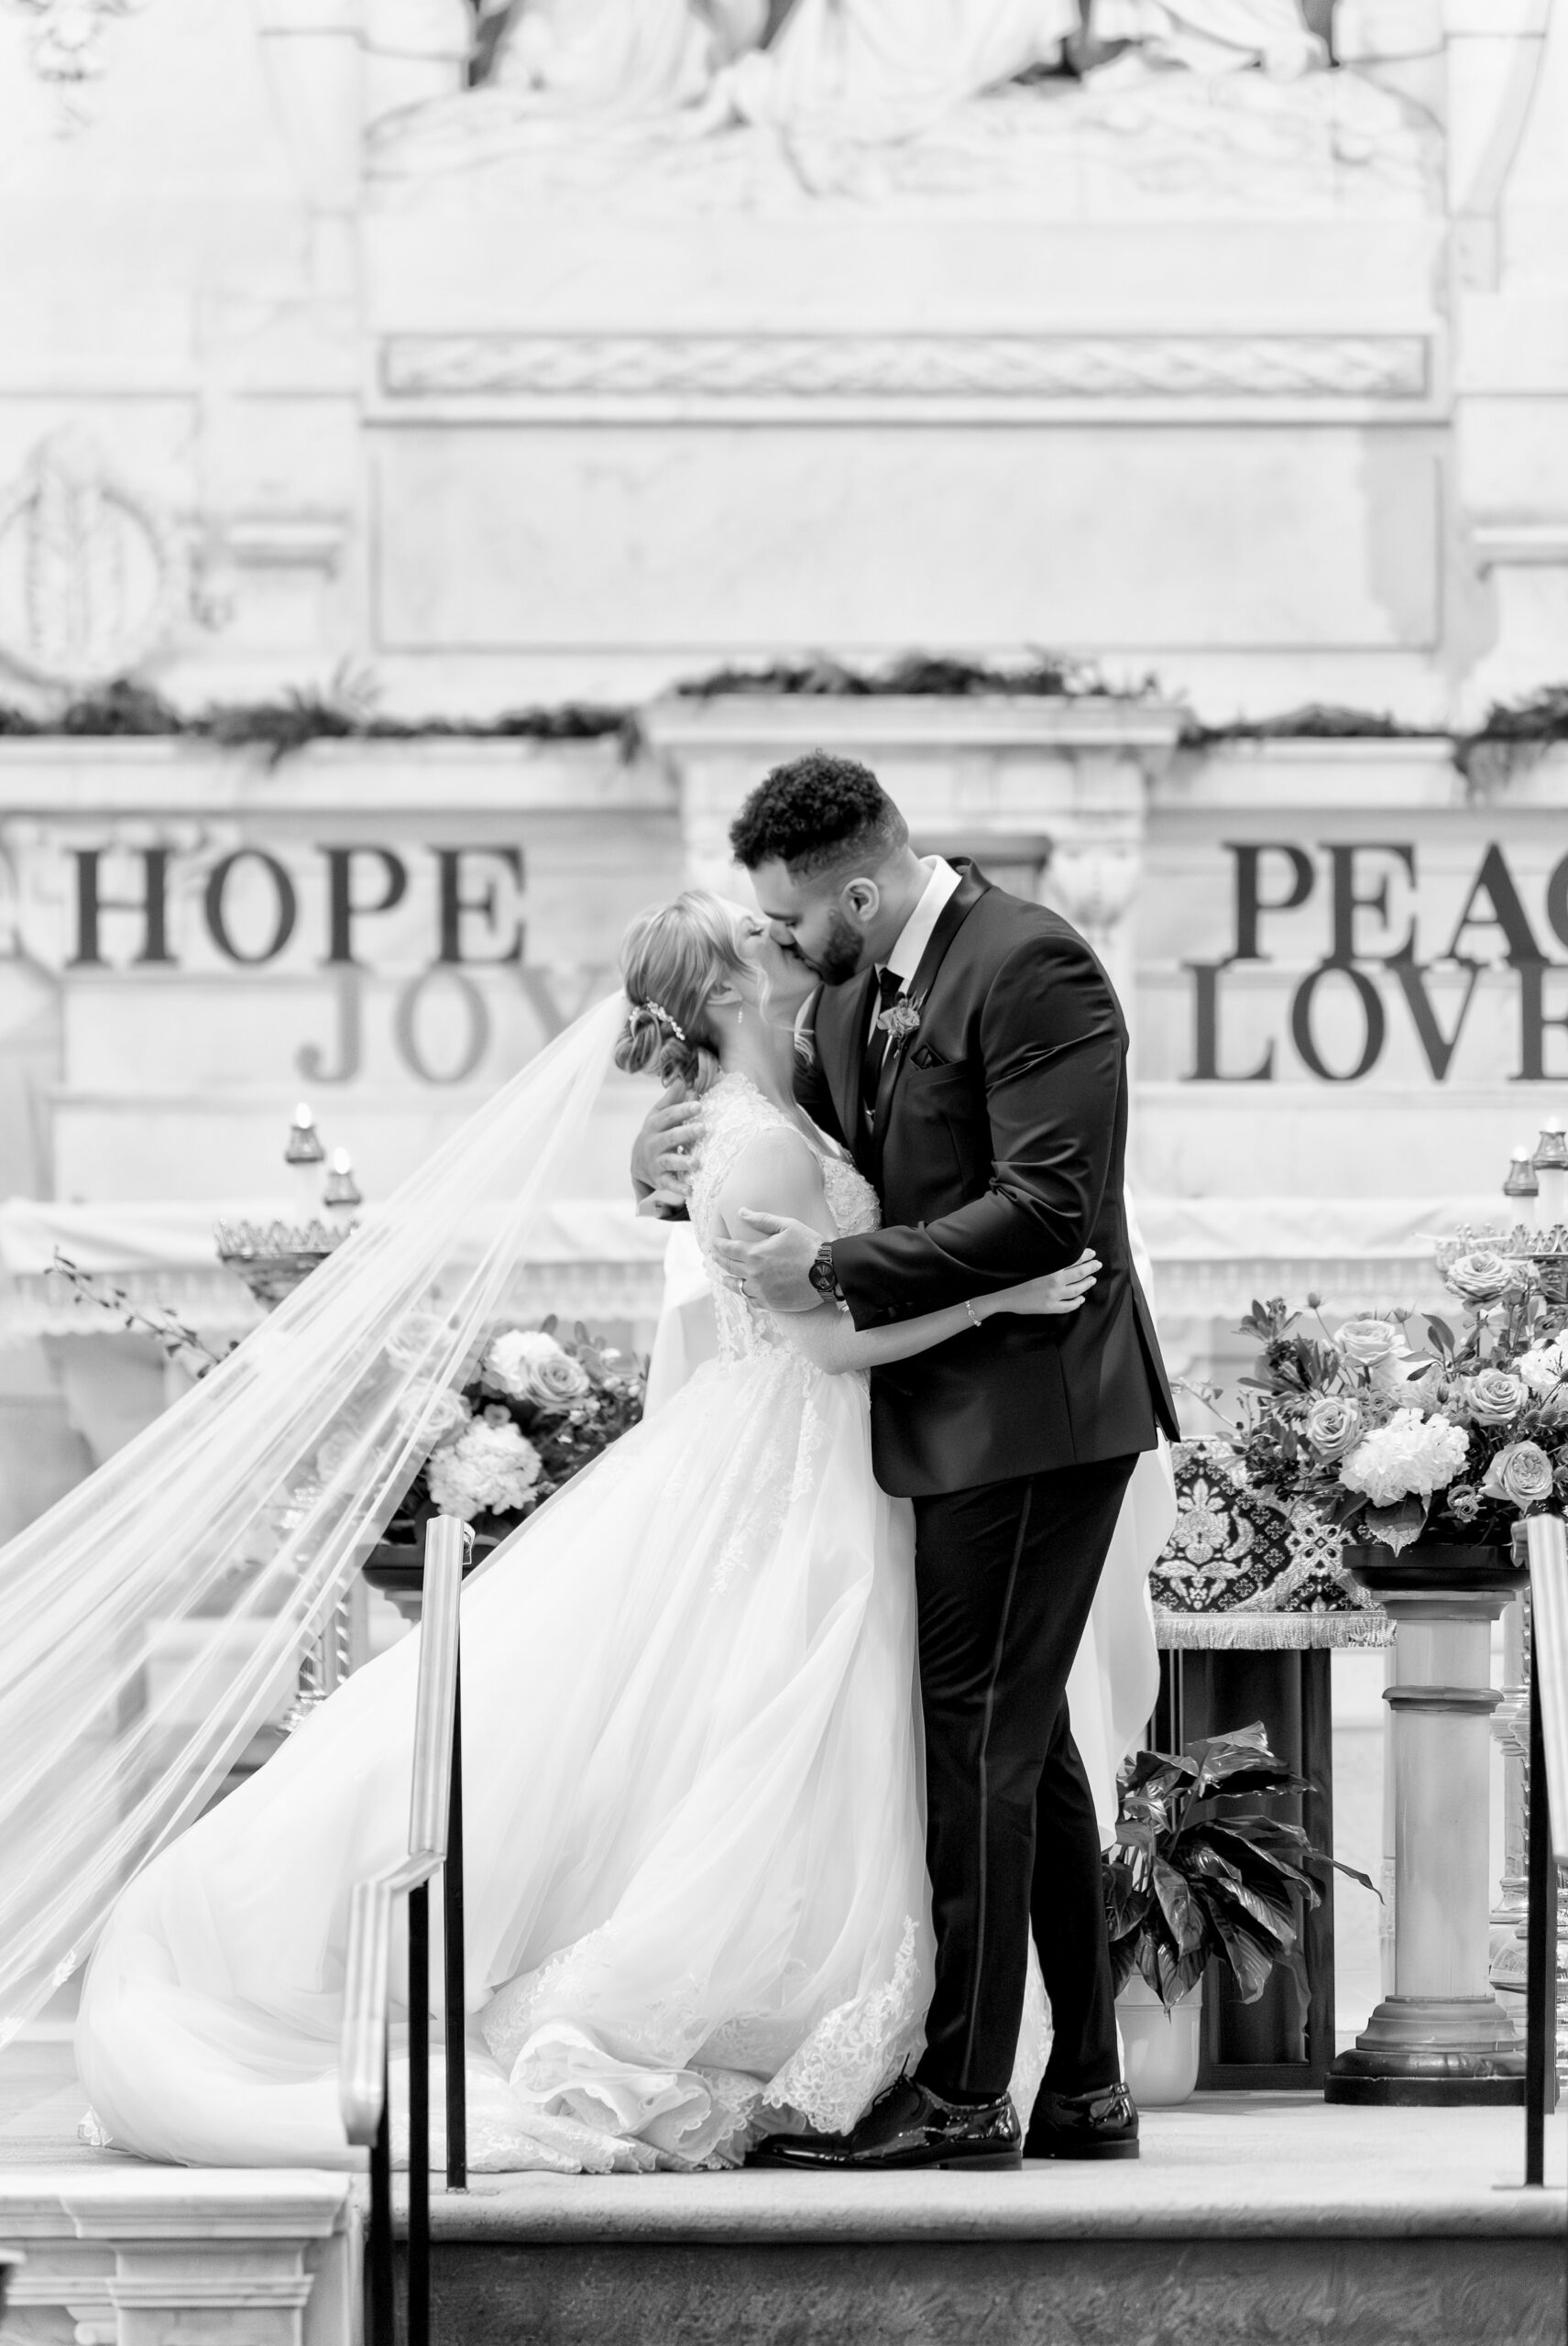 A bride and groom kiss at the altar Sts Peter and Paul Jesuit Church in Detroit on their wedding day.  